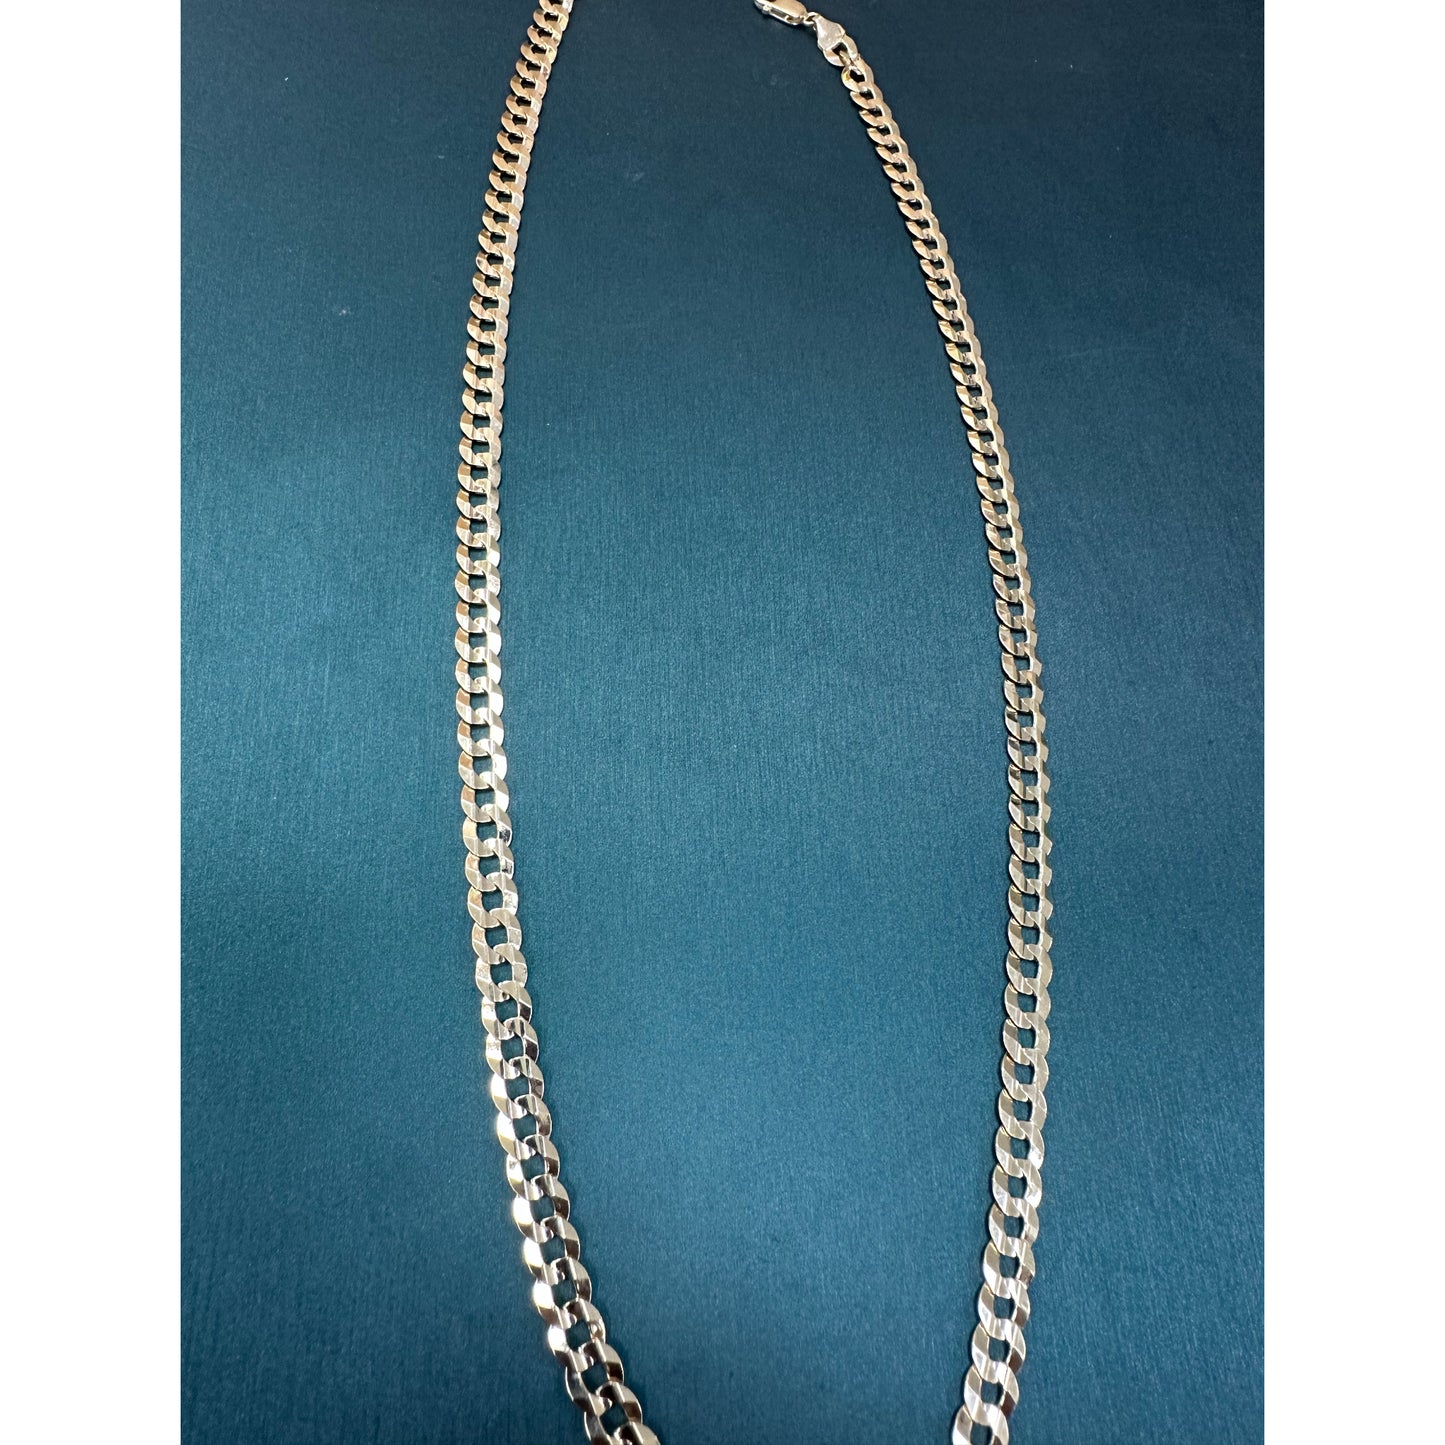 Curb Link Chain 7.5mm 26 inches 14k